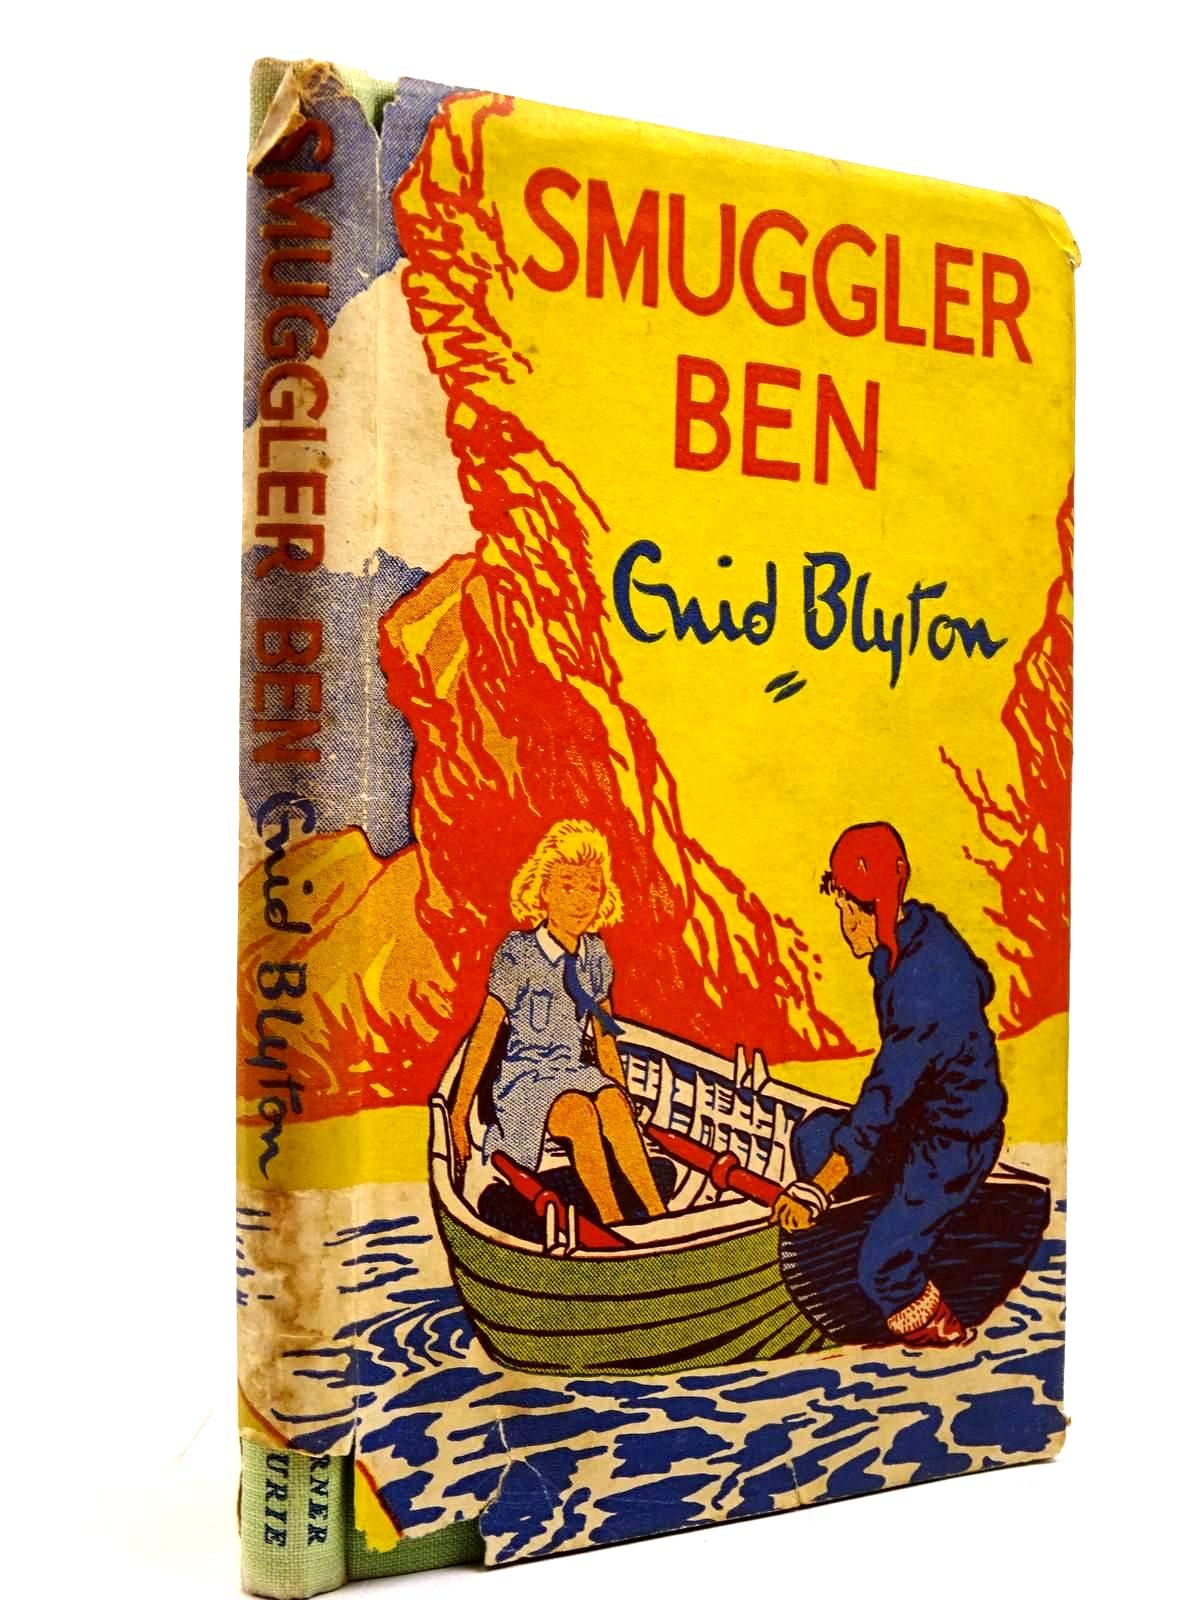 Photo of SMUGGLER BEN written by Blyton, Enid illustrated by Backhouse, G.W. published by Werner Laurie (STOCK CODE: 2130662)  for sale by Stella & Rose's Books